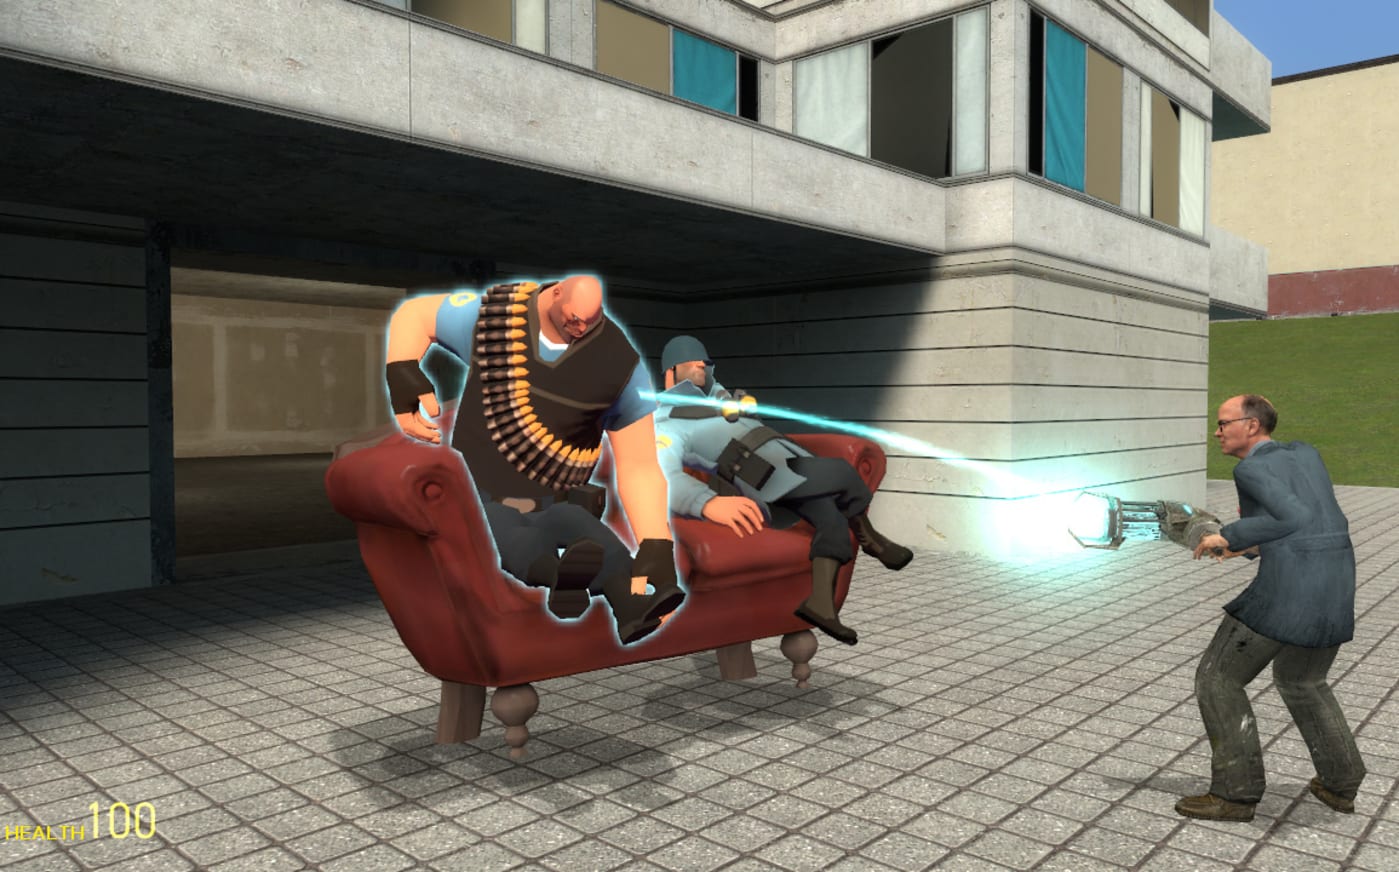 Garry’s Mod faces deluge of Nintendo-related DMCA takedown notices